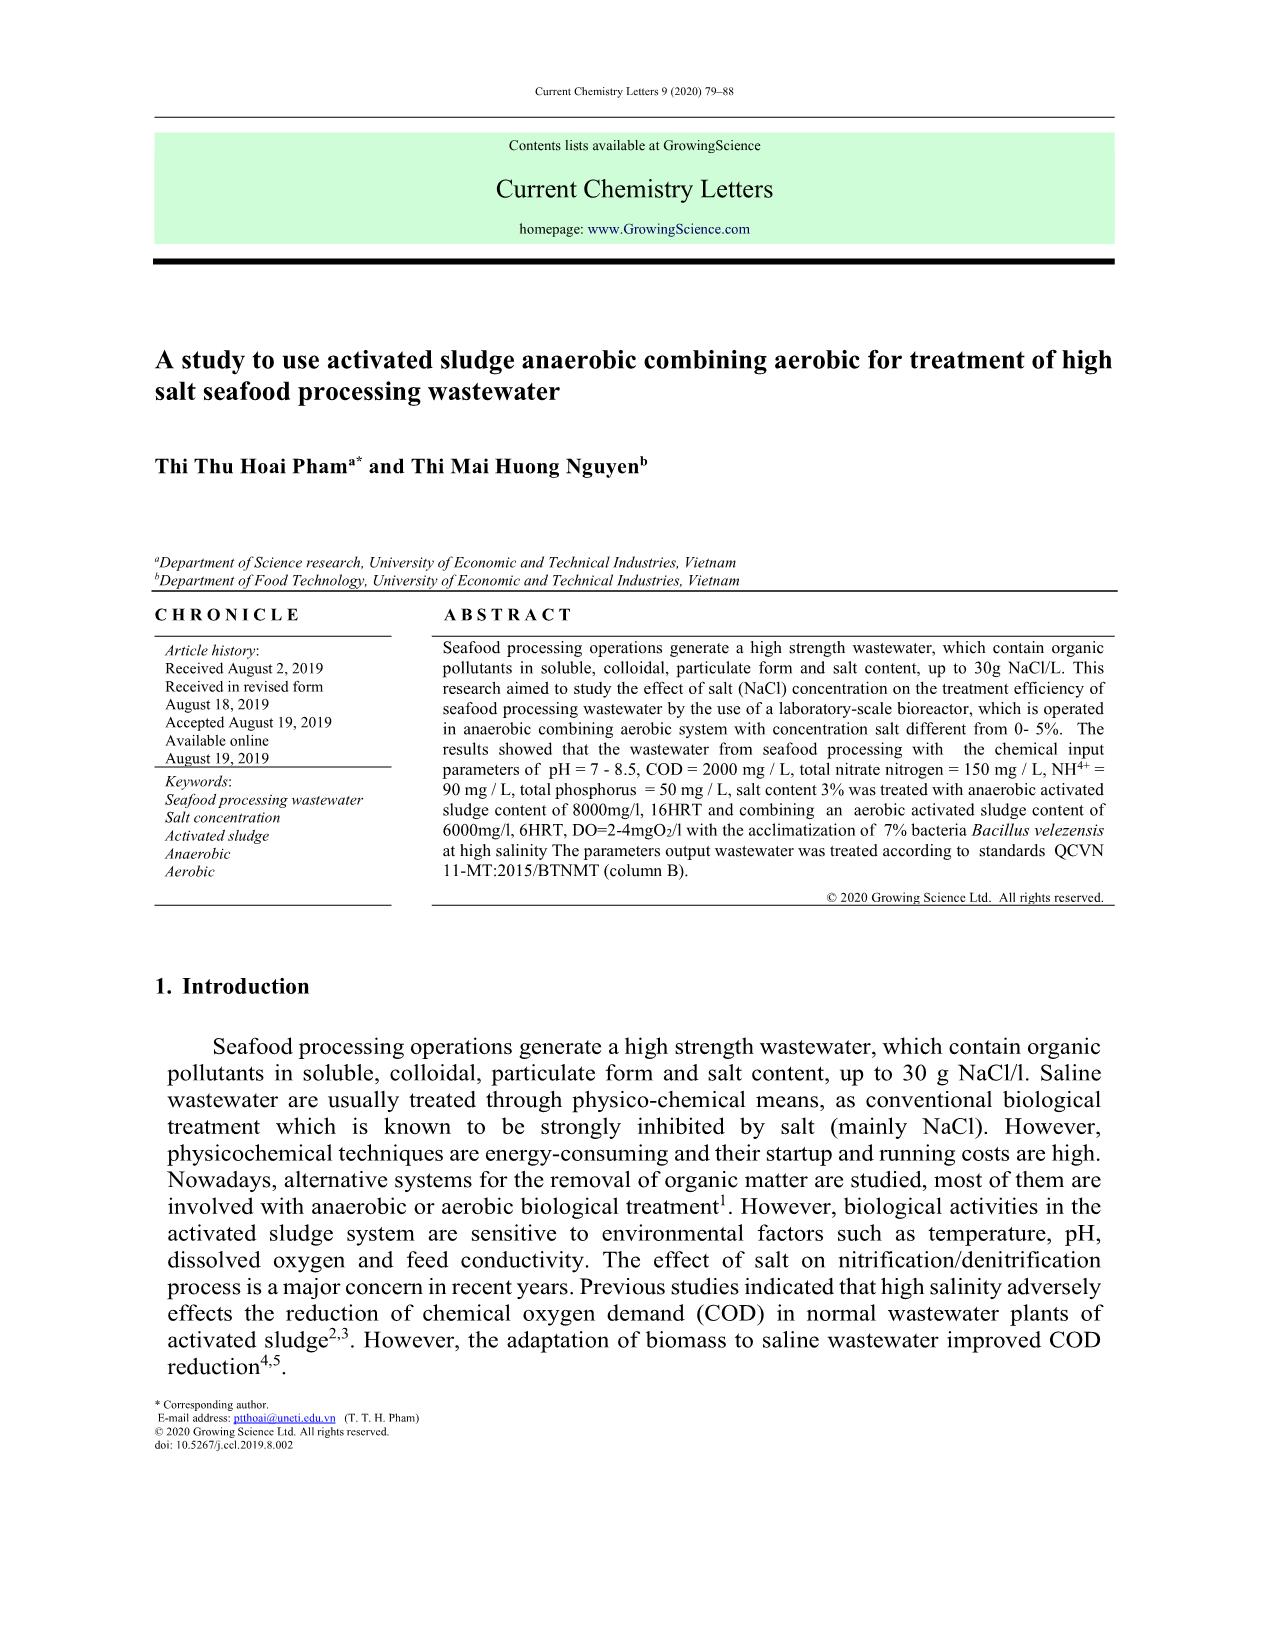 A study to use activated sludge anaerobic combining aerobic for treatment of high salt seafood processing wastewater trang 1